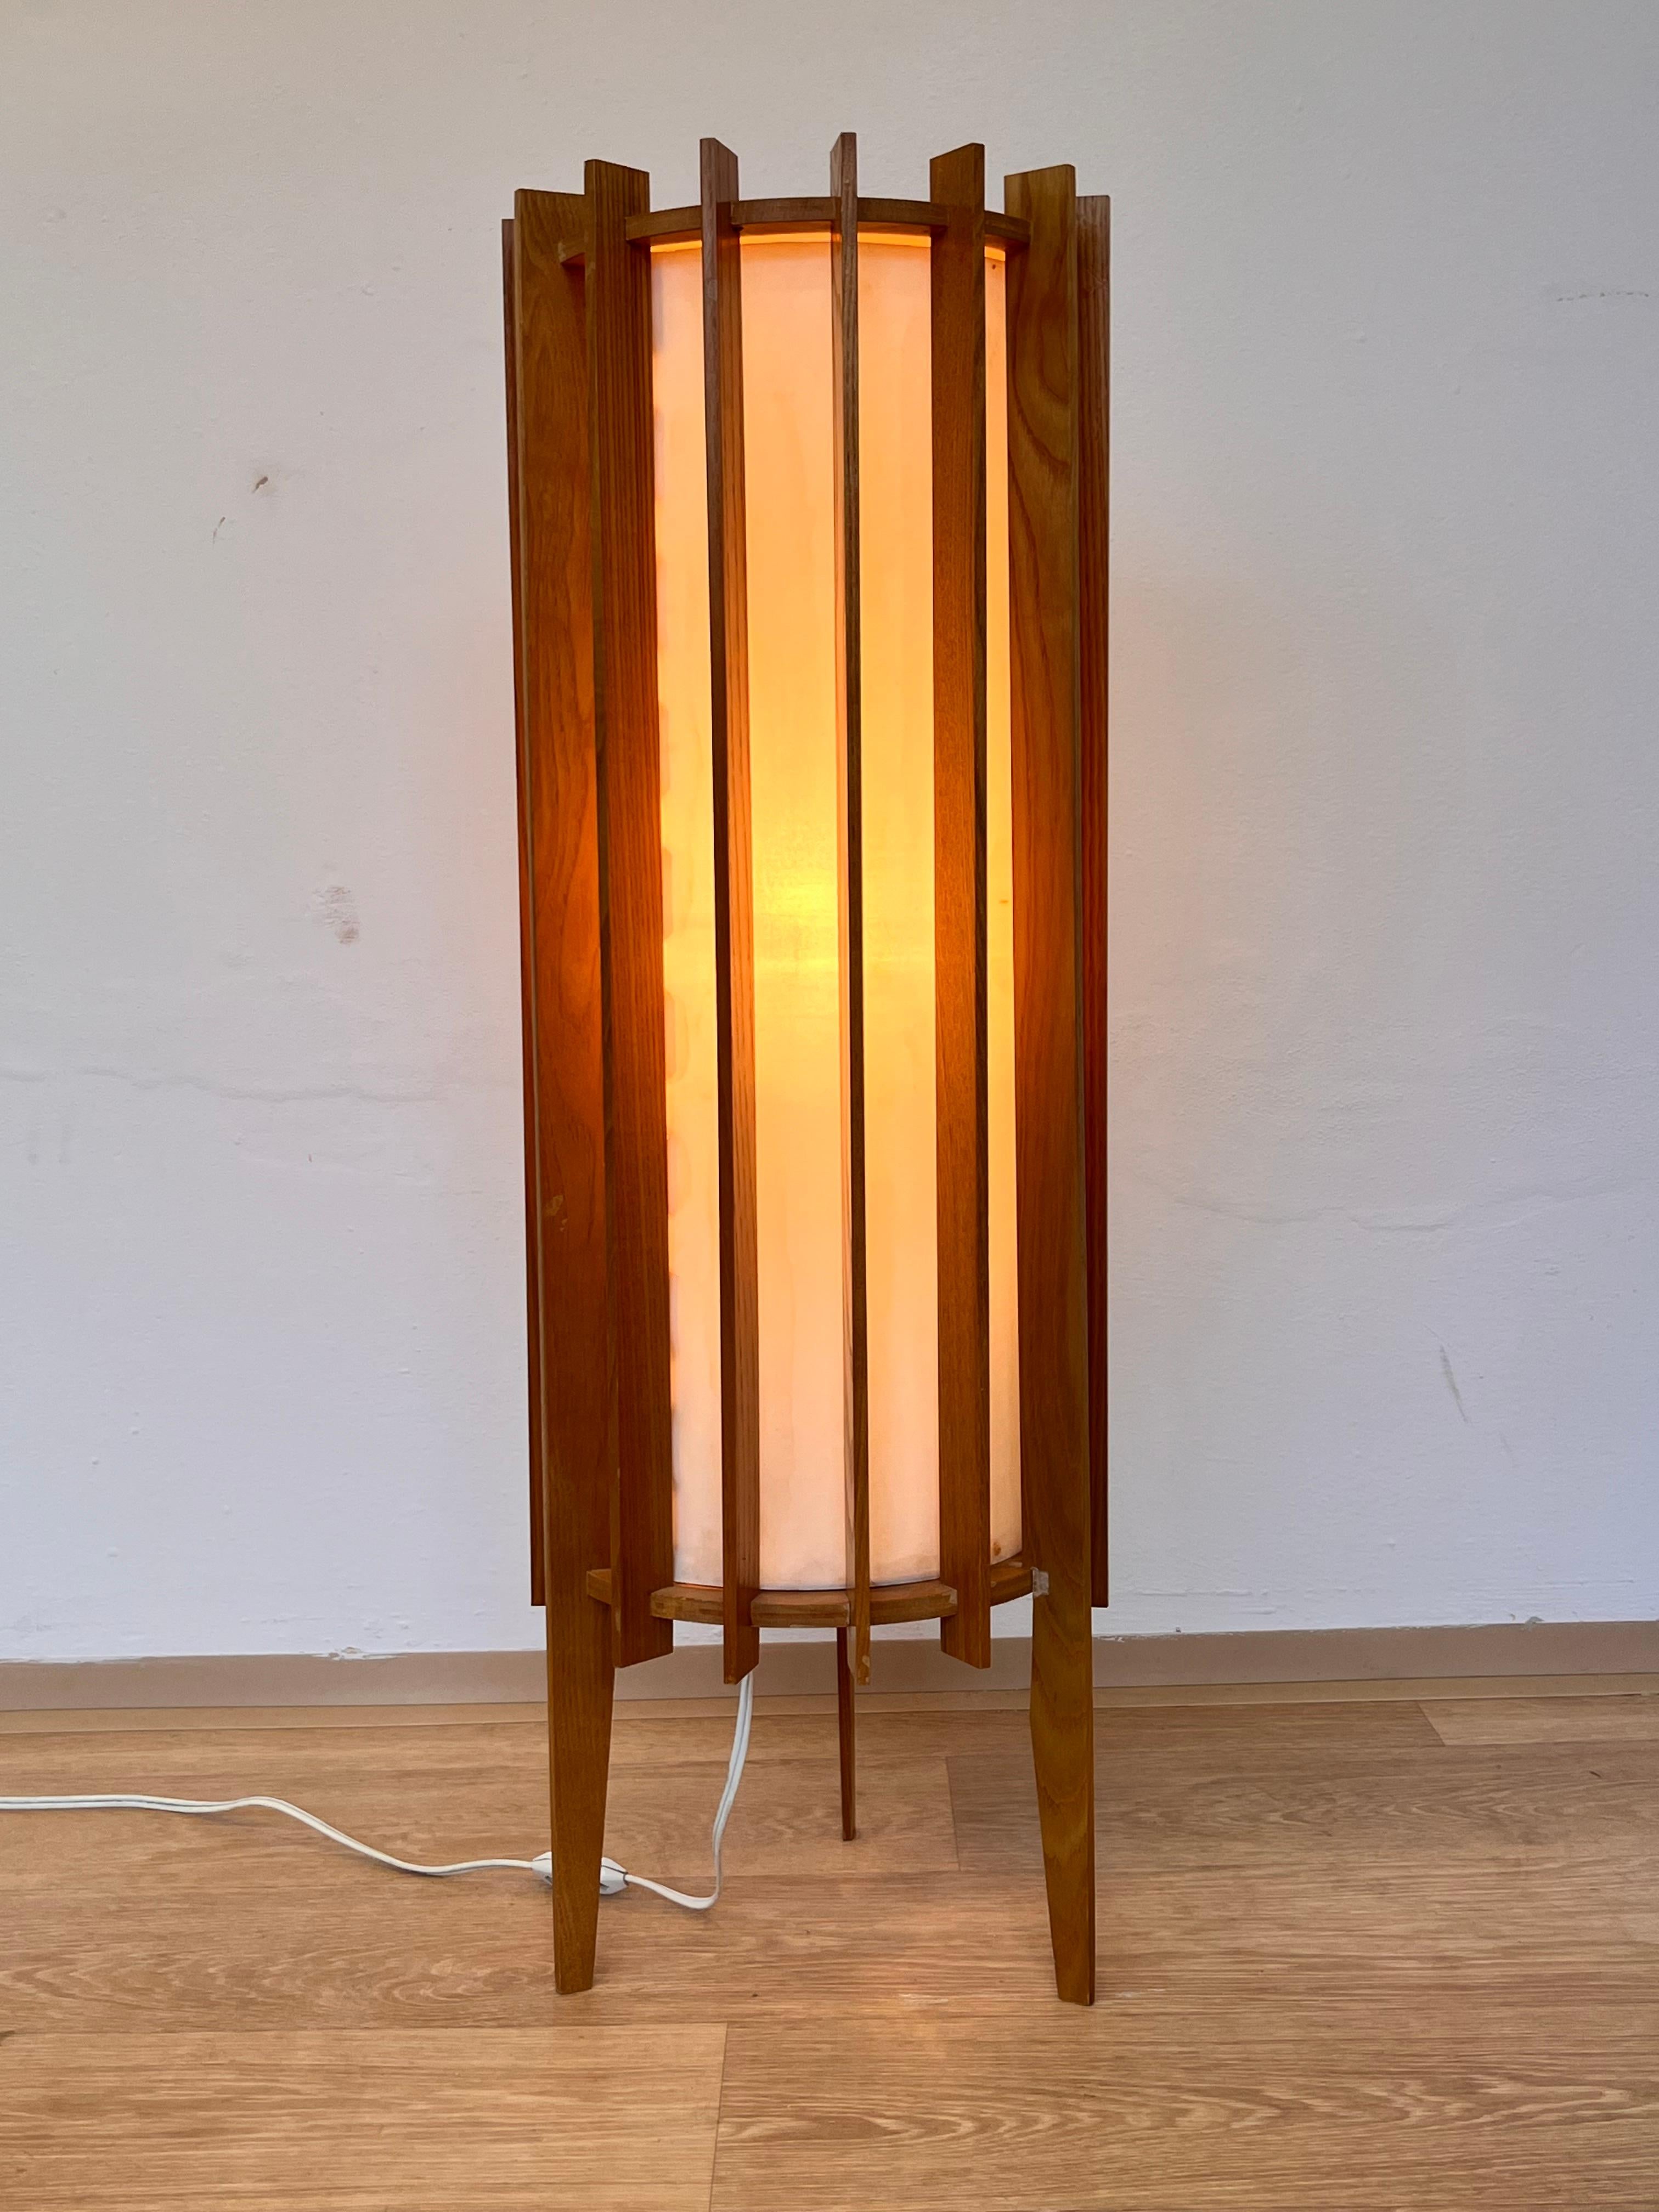 Mid-Century Modern Ib Fabiansen wooden SPACE AGE Floor Lamp by Fog and Mørup - Denmark - 1960s For Sale